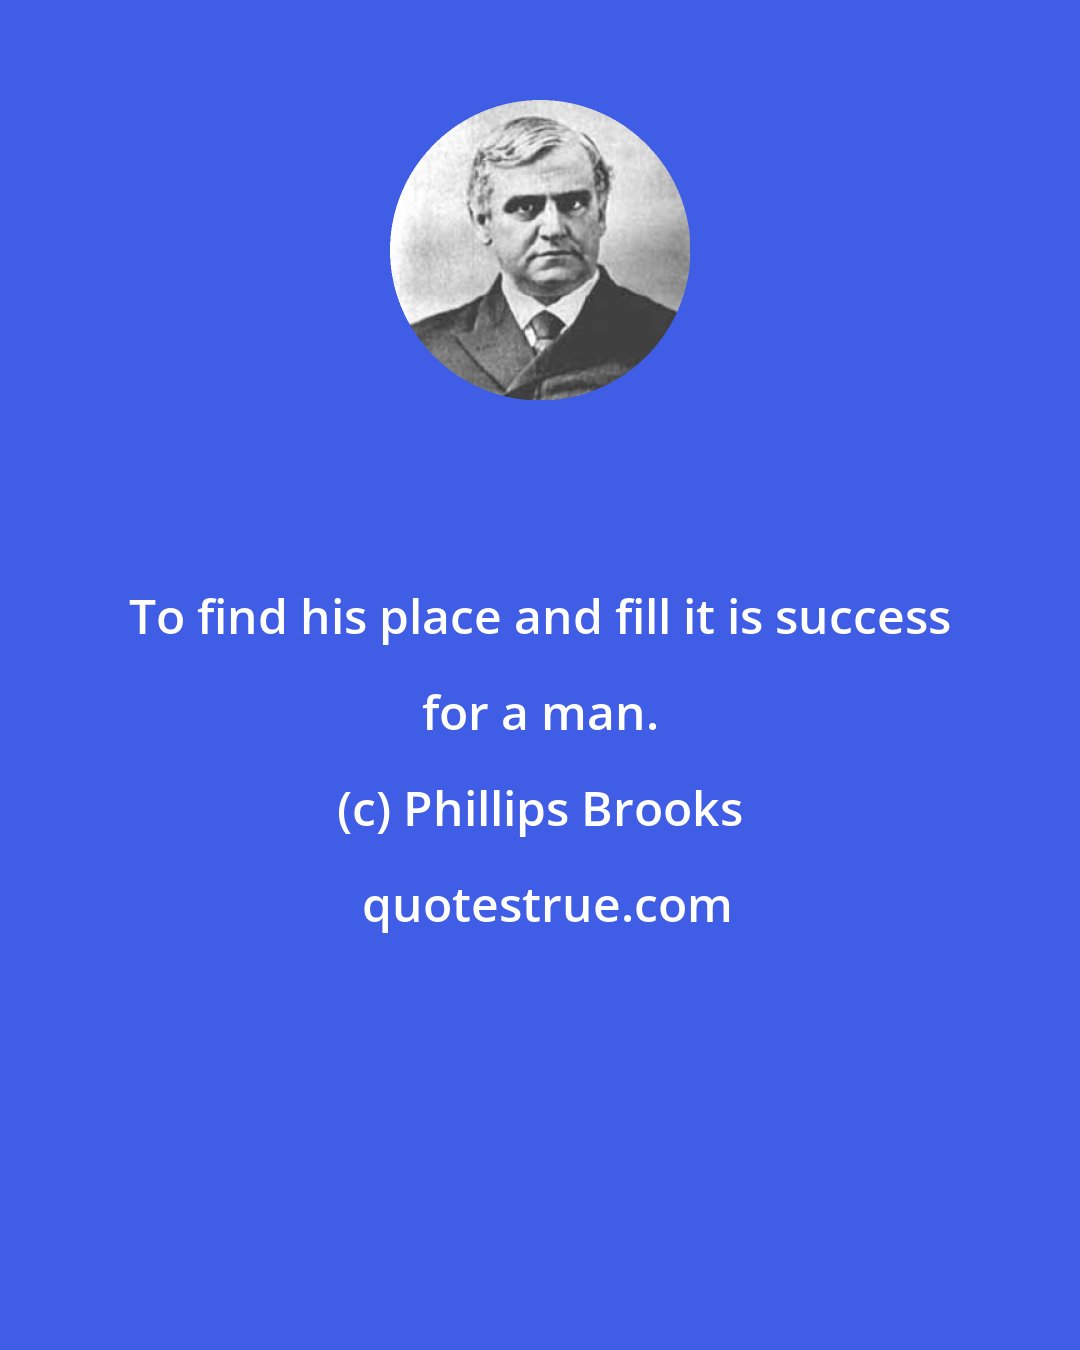 Phillips Brooks: To find his place and fill it is success for a man.